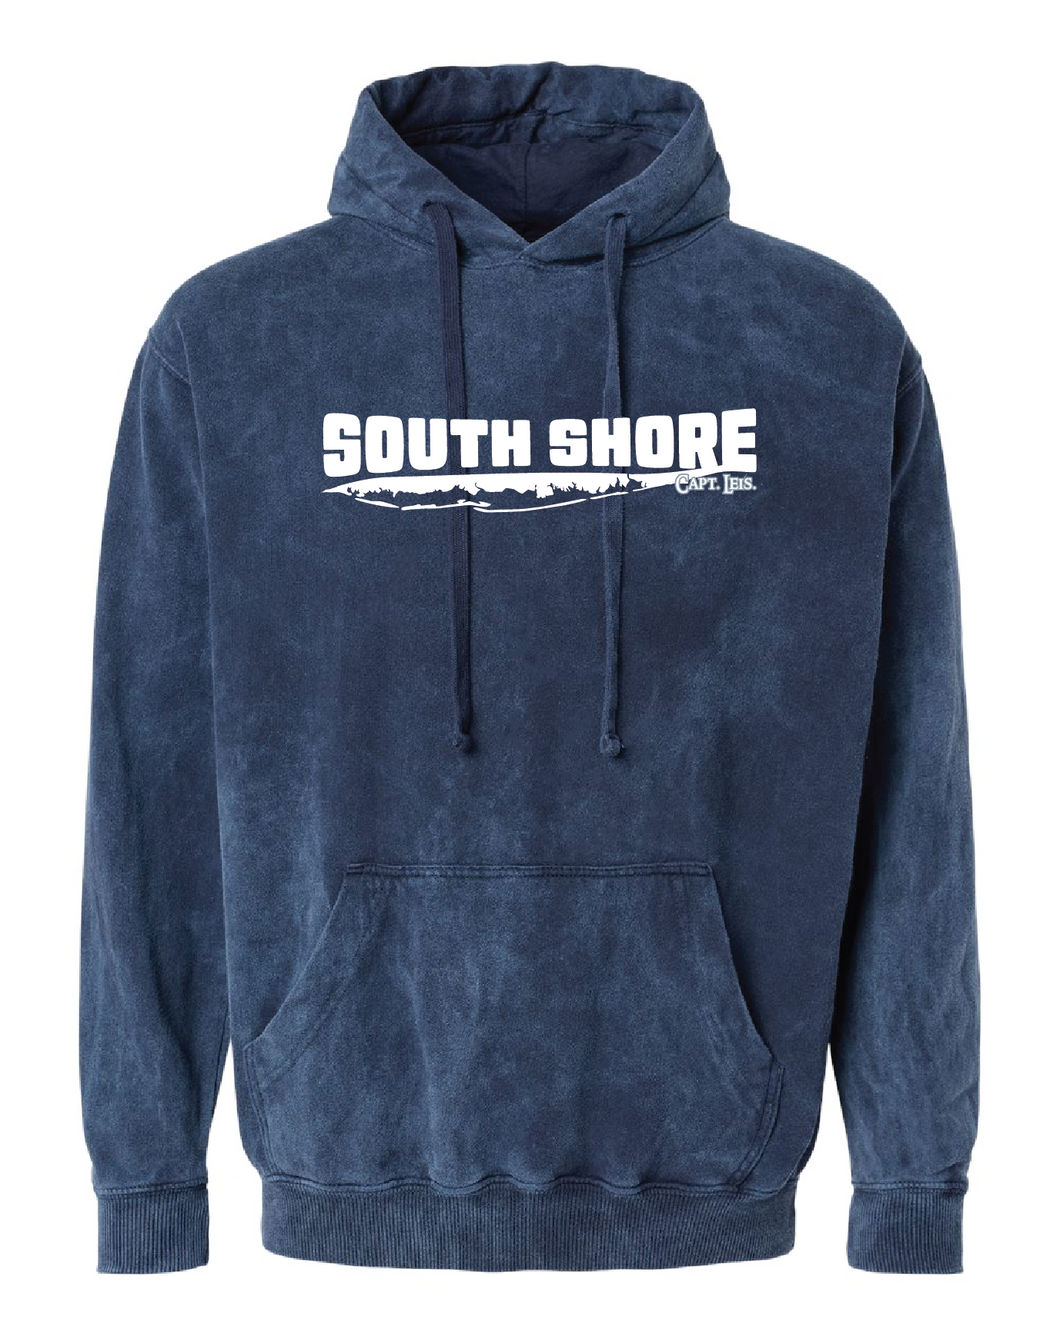 South Shore Mineral Wash Hoodie - Navy